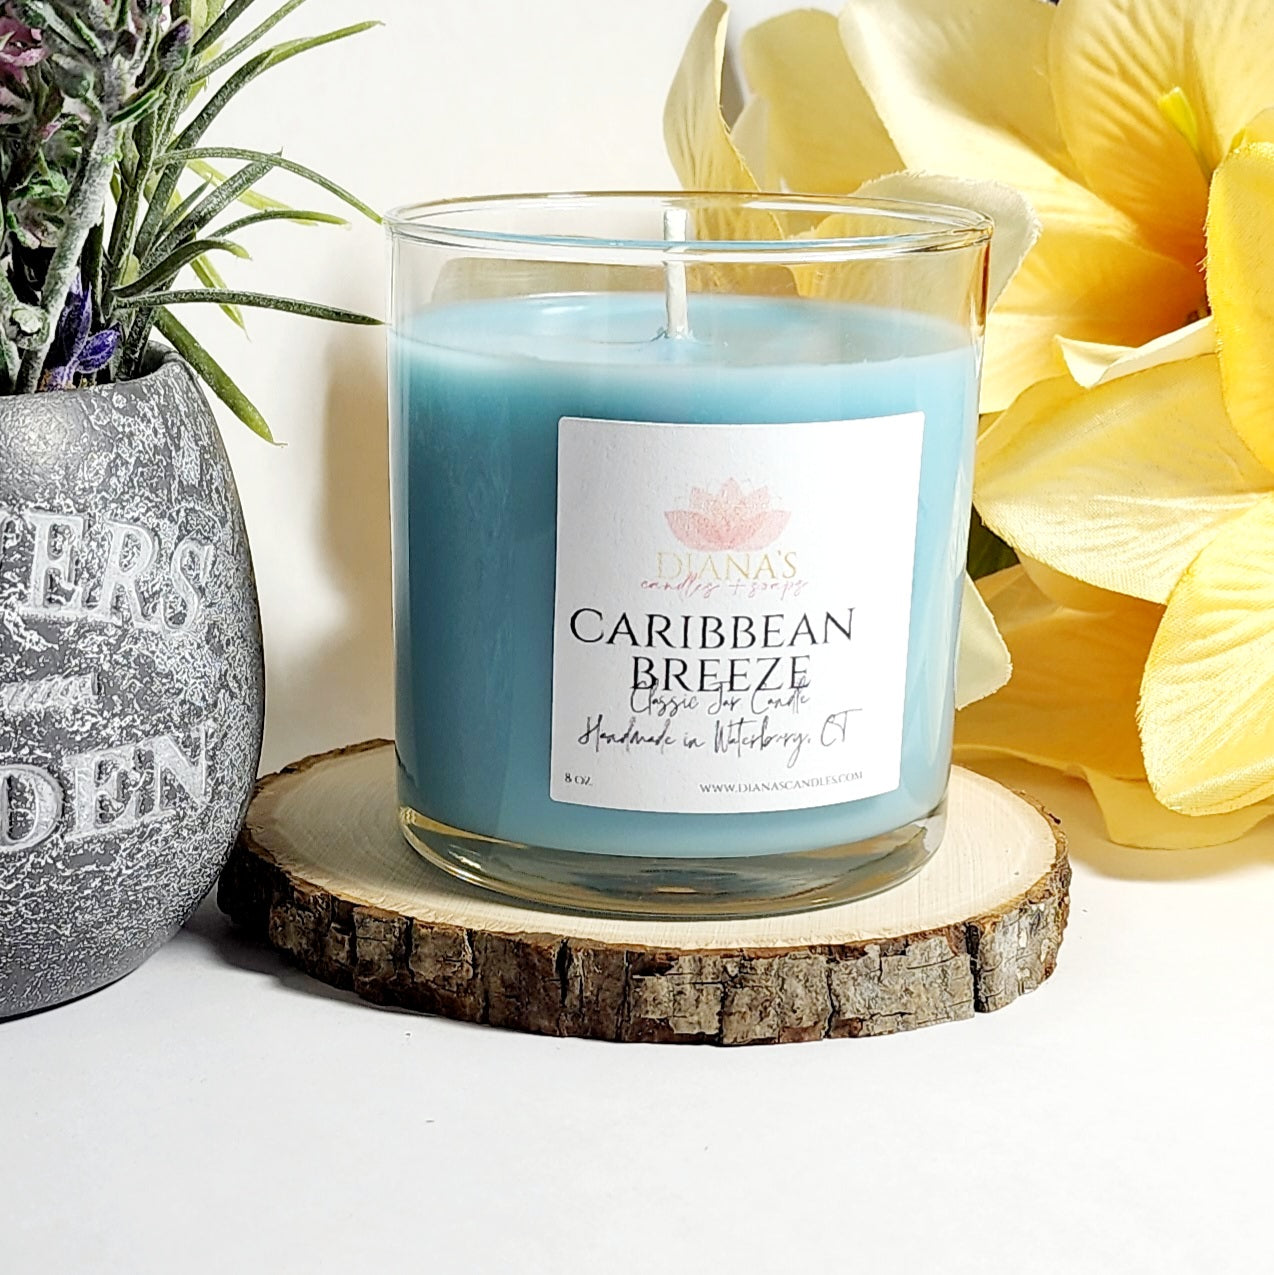 Caribbean Breeze Jar Candle Diana's Candles and Soaps